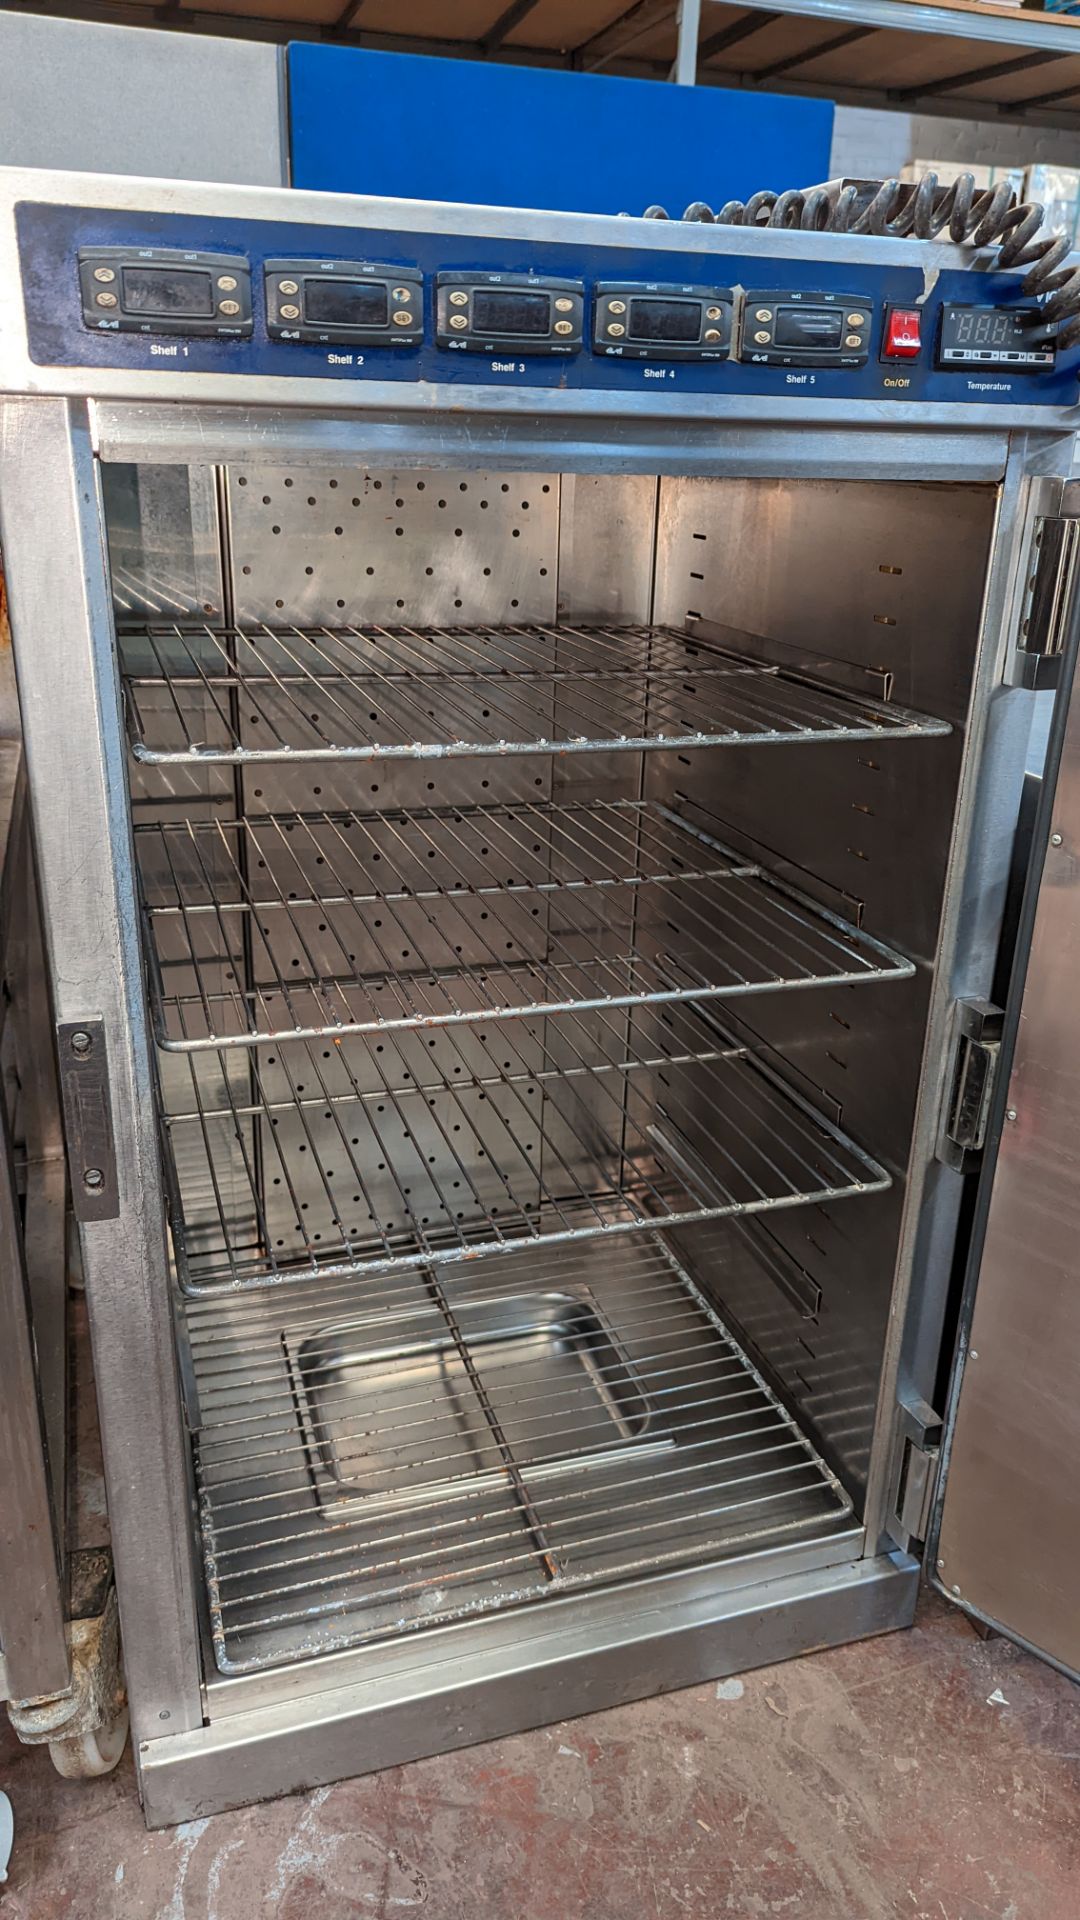 Victor stainless steel warming cupboard - Image 5 of 7